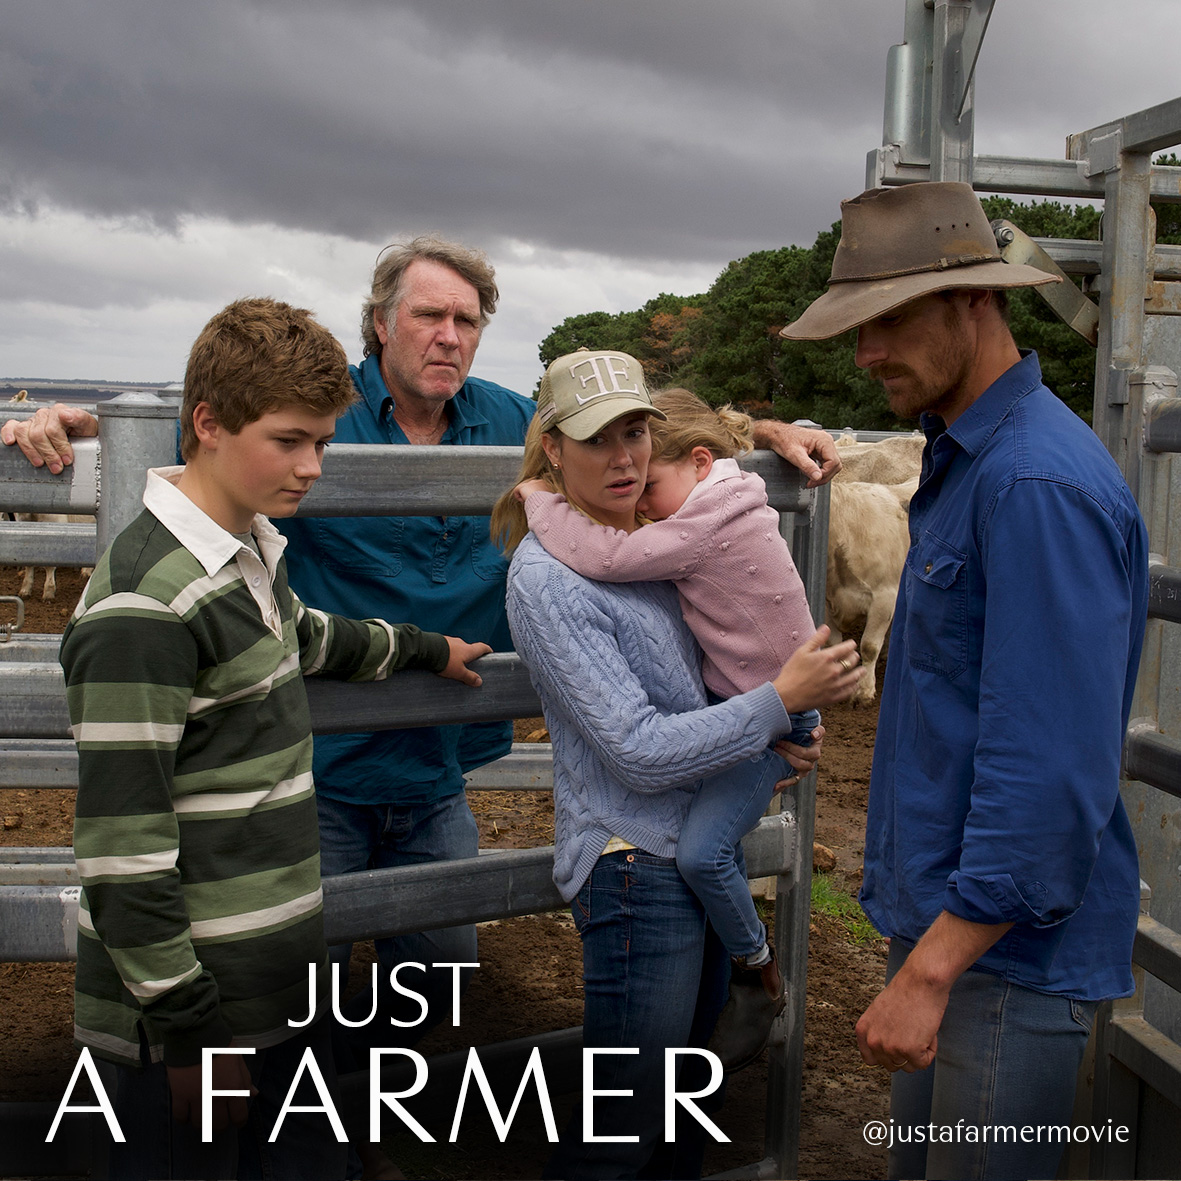 Meet the JUST A FARMER family - In rural life, family is everything. Living and working on the farm together isn't always easy, but it strengthens the bonds we cherish. It's all about taking care of each other. 💚🚜 #FarmLife #justafarmer #featurefilm